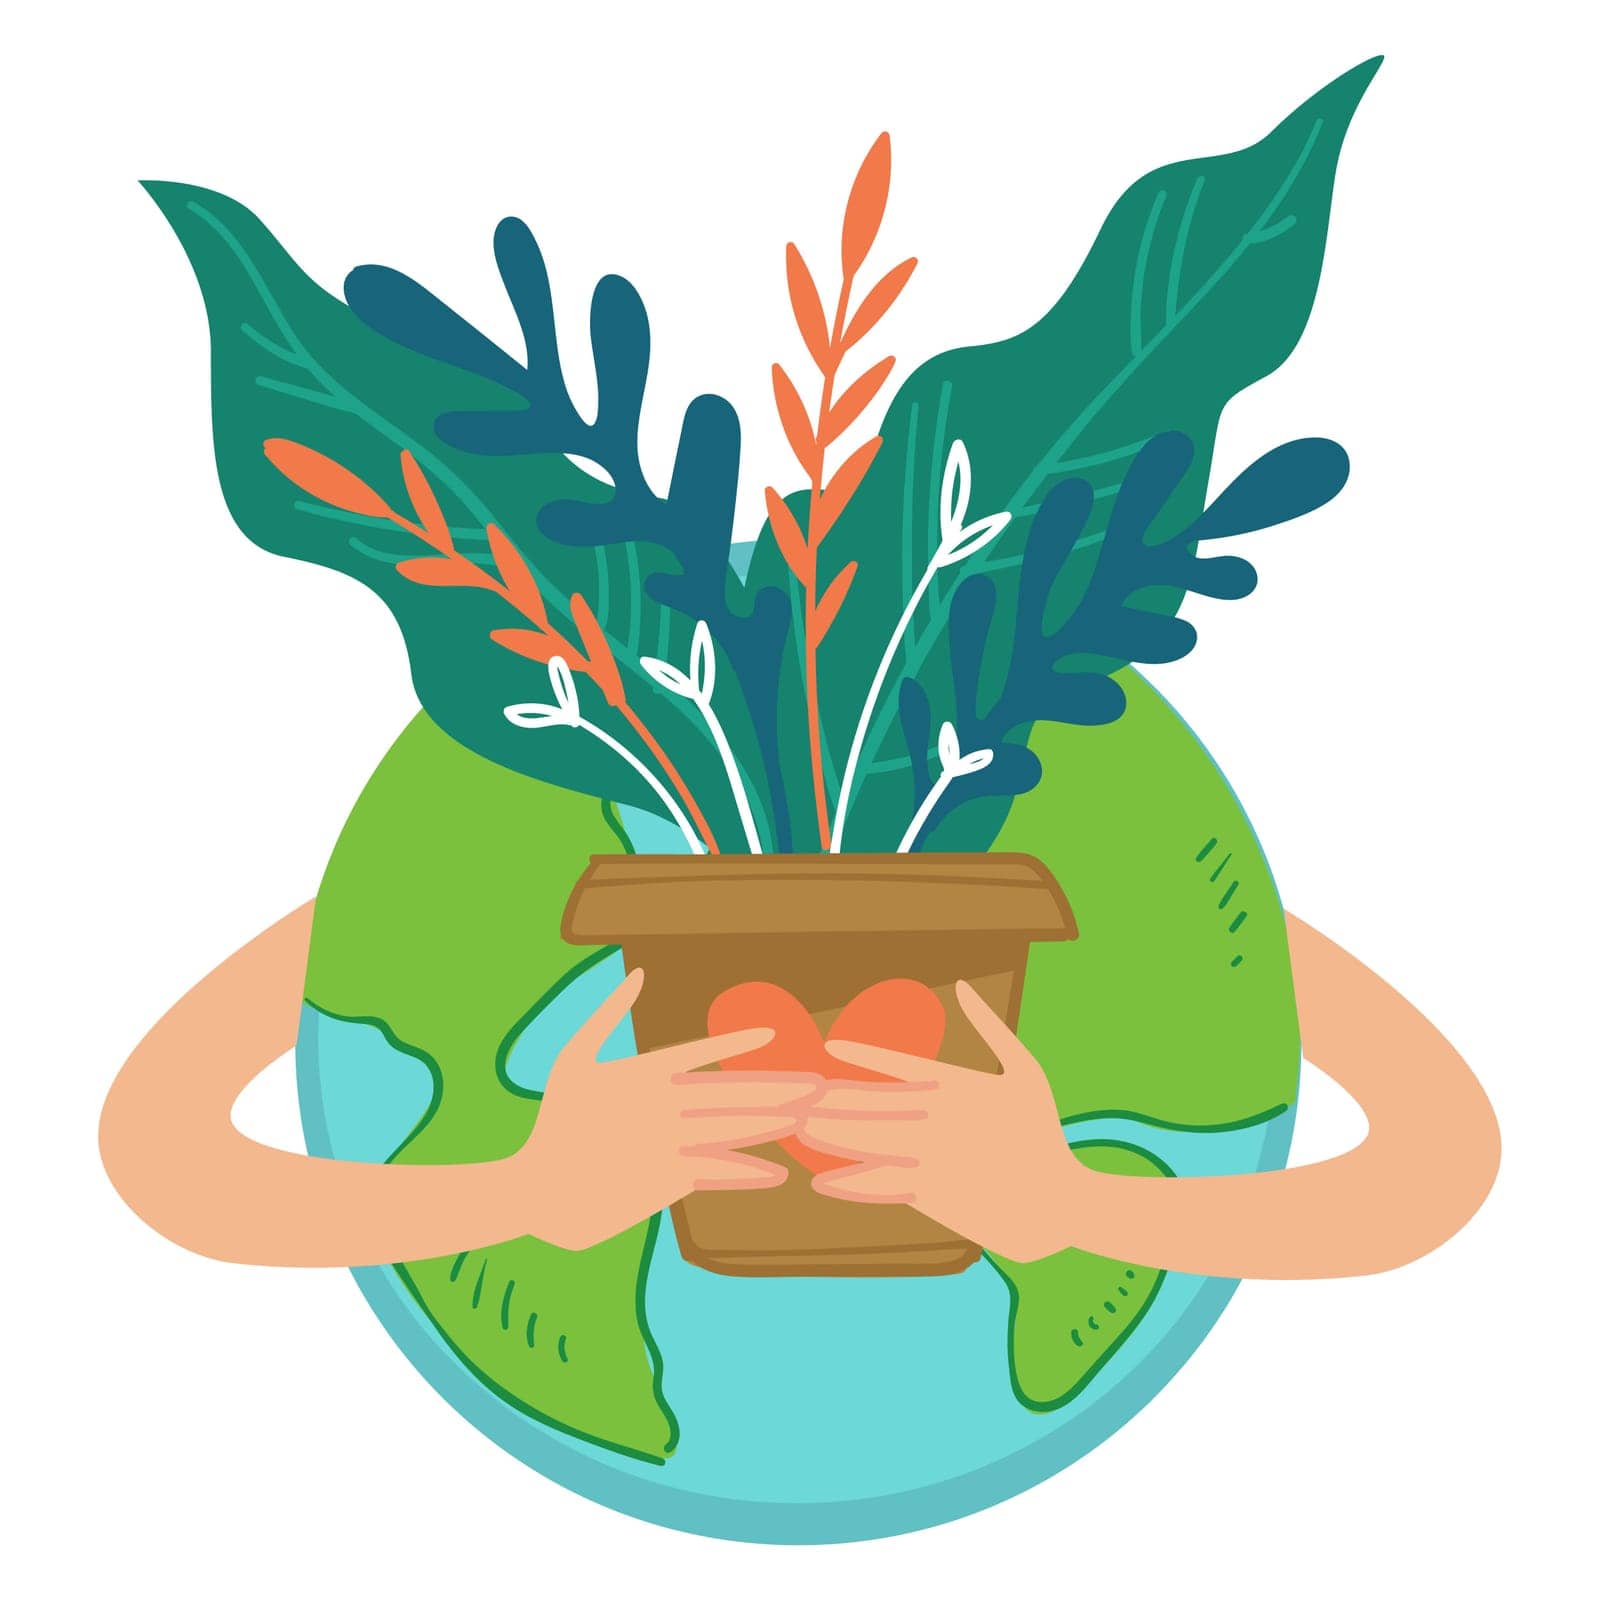 Caring for nature and natural resources of planet earth. hands holding potted plant with lush flora and leaves. Protection and conservation of ecosystem. Ecology and health. Vector in flat style